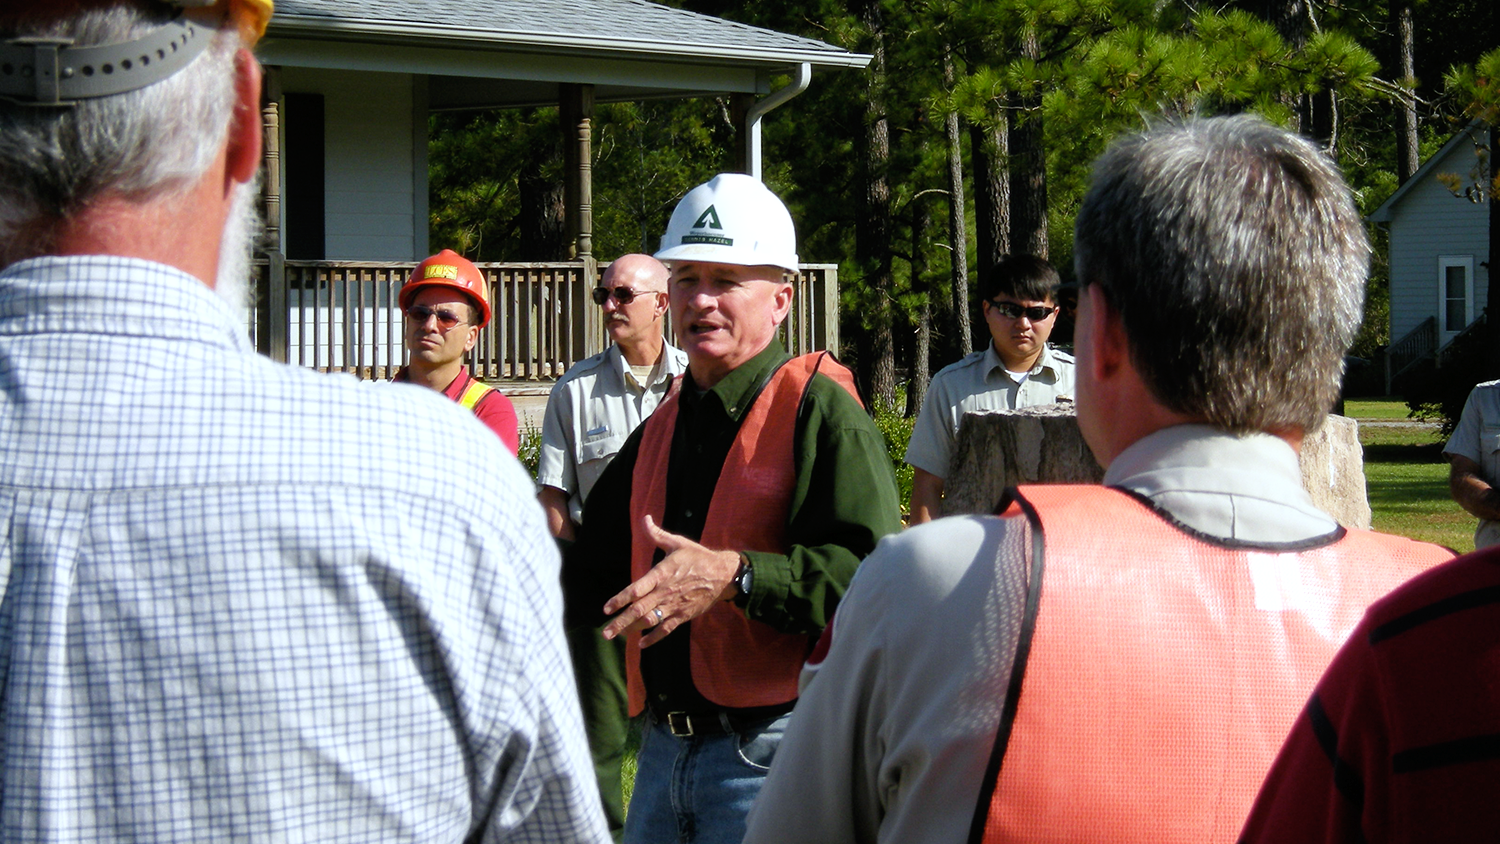 Forestry Extension program - Extension and Outreach - College of Natural Resources at NC State University